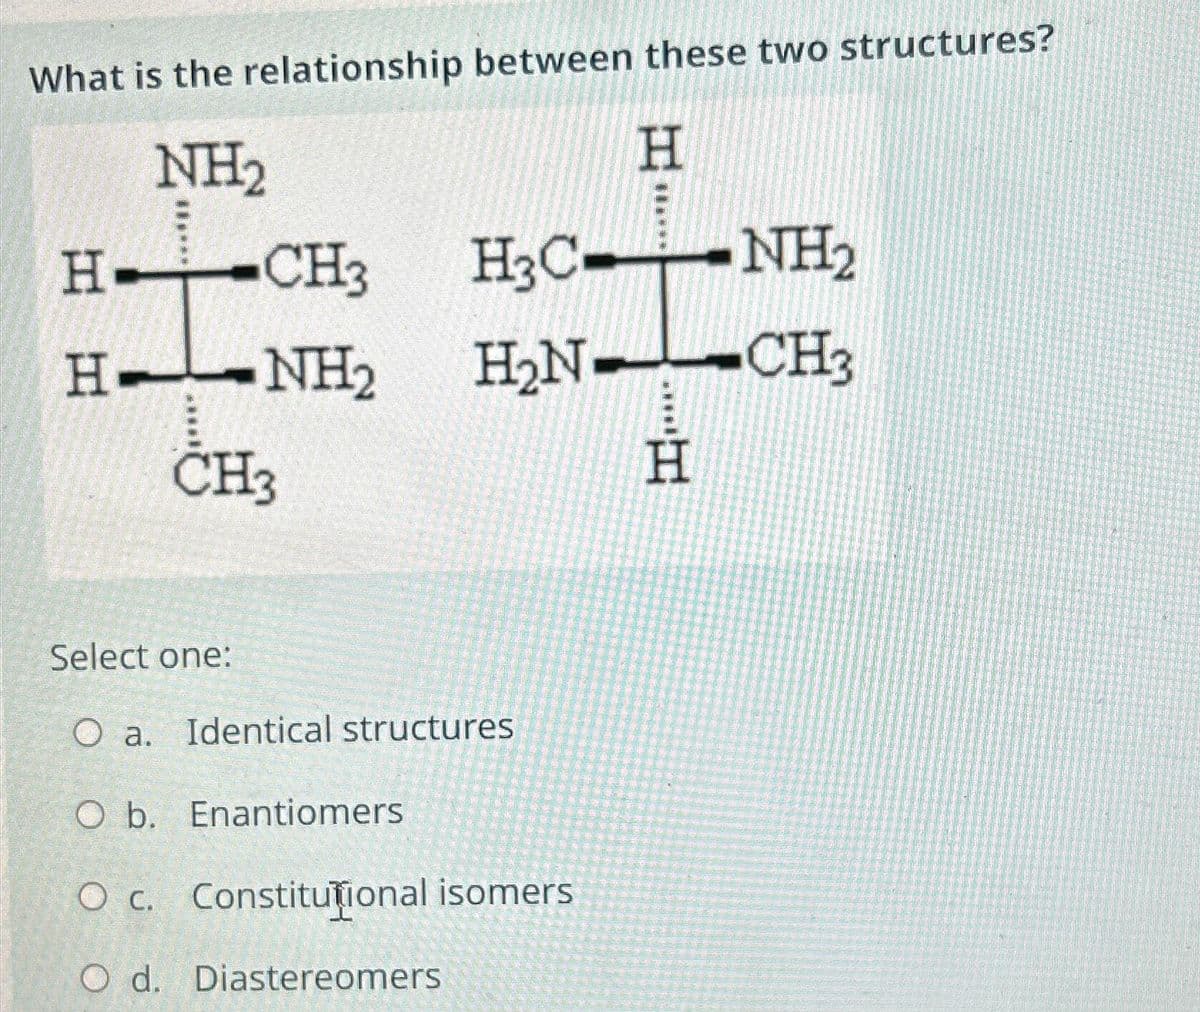 What is the relationship between these two structures?
NH₂
H
H-CH3
H-NH2
CH3
HạC.
H₂N
Select one:
O a. Identical structures
O b. Enantiomers
O c. Constitutional isomers
O d. Diastereomers
...H
Η
NH2
NH₂
CH3